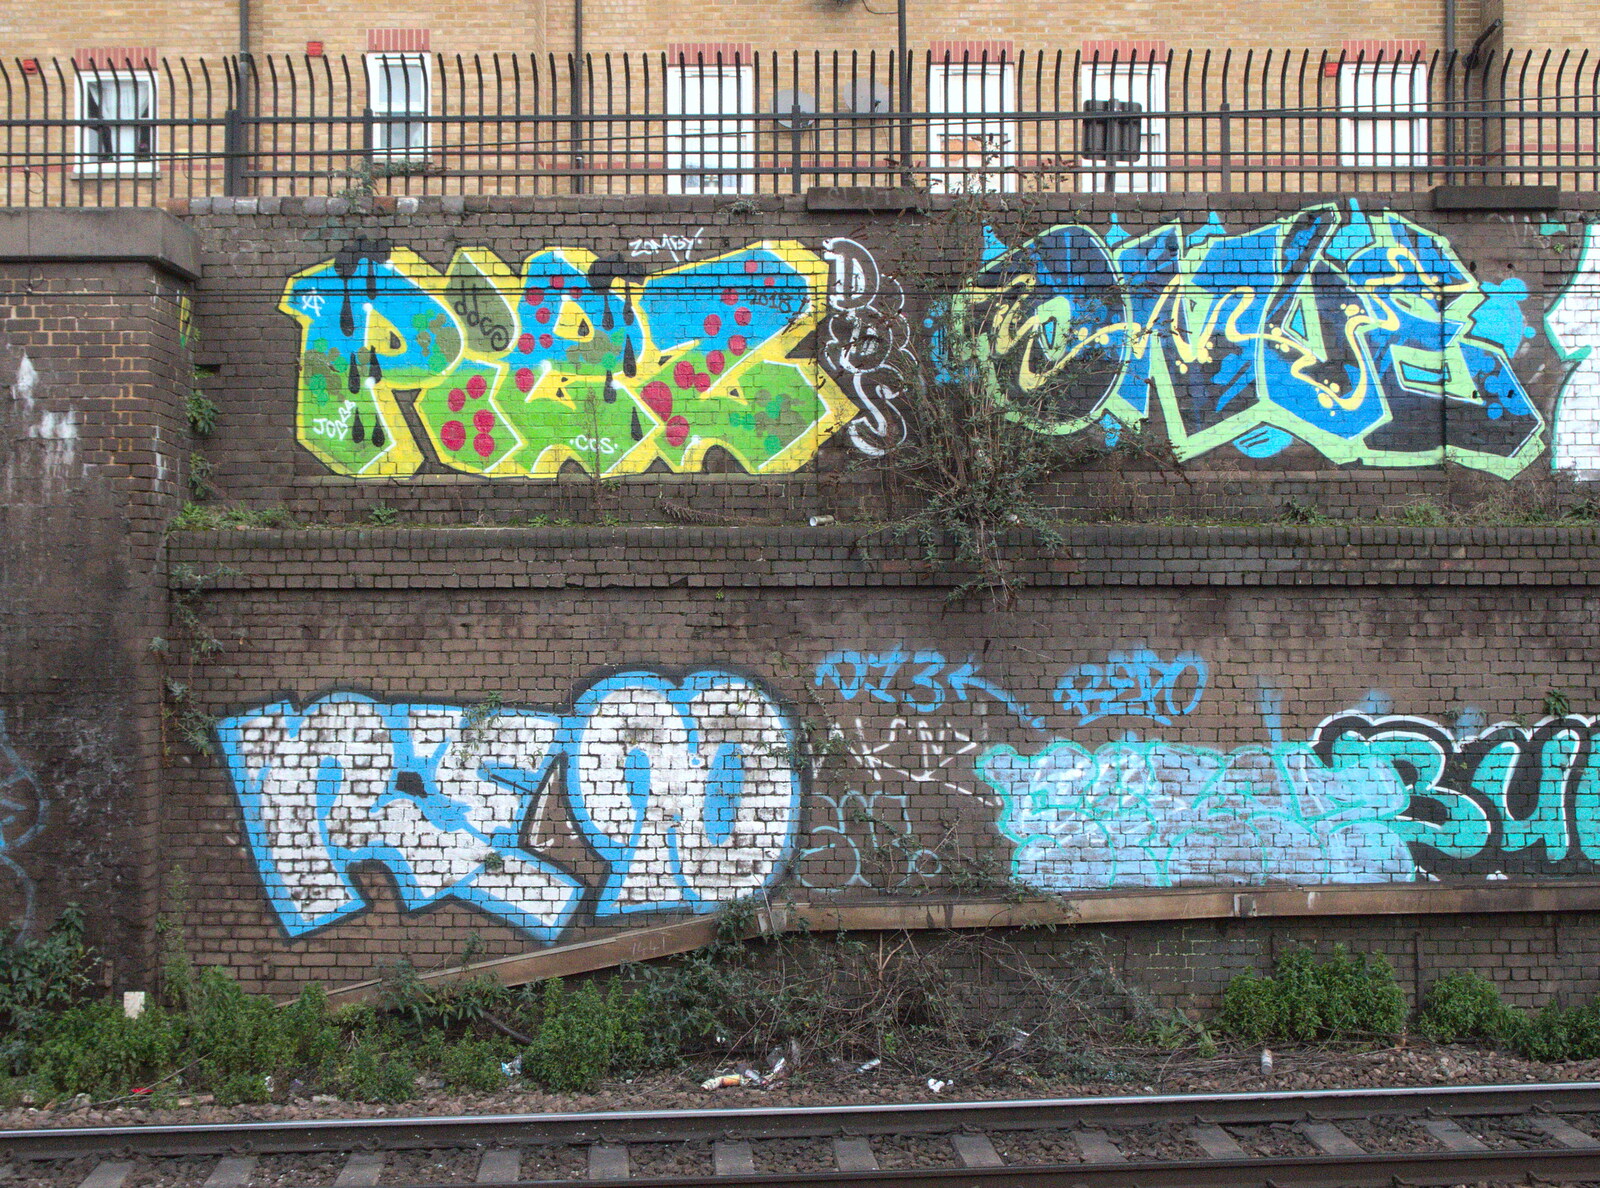 A fairly old set of tags survives from Railway Graffiti, Tower Hamlets, London - 12th February 2019